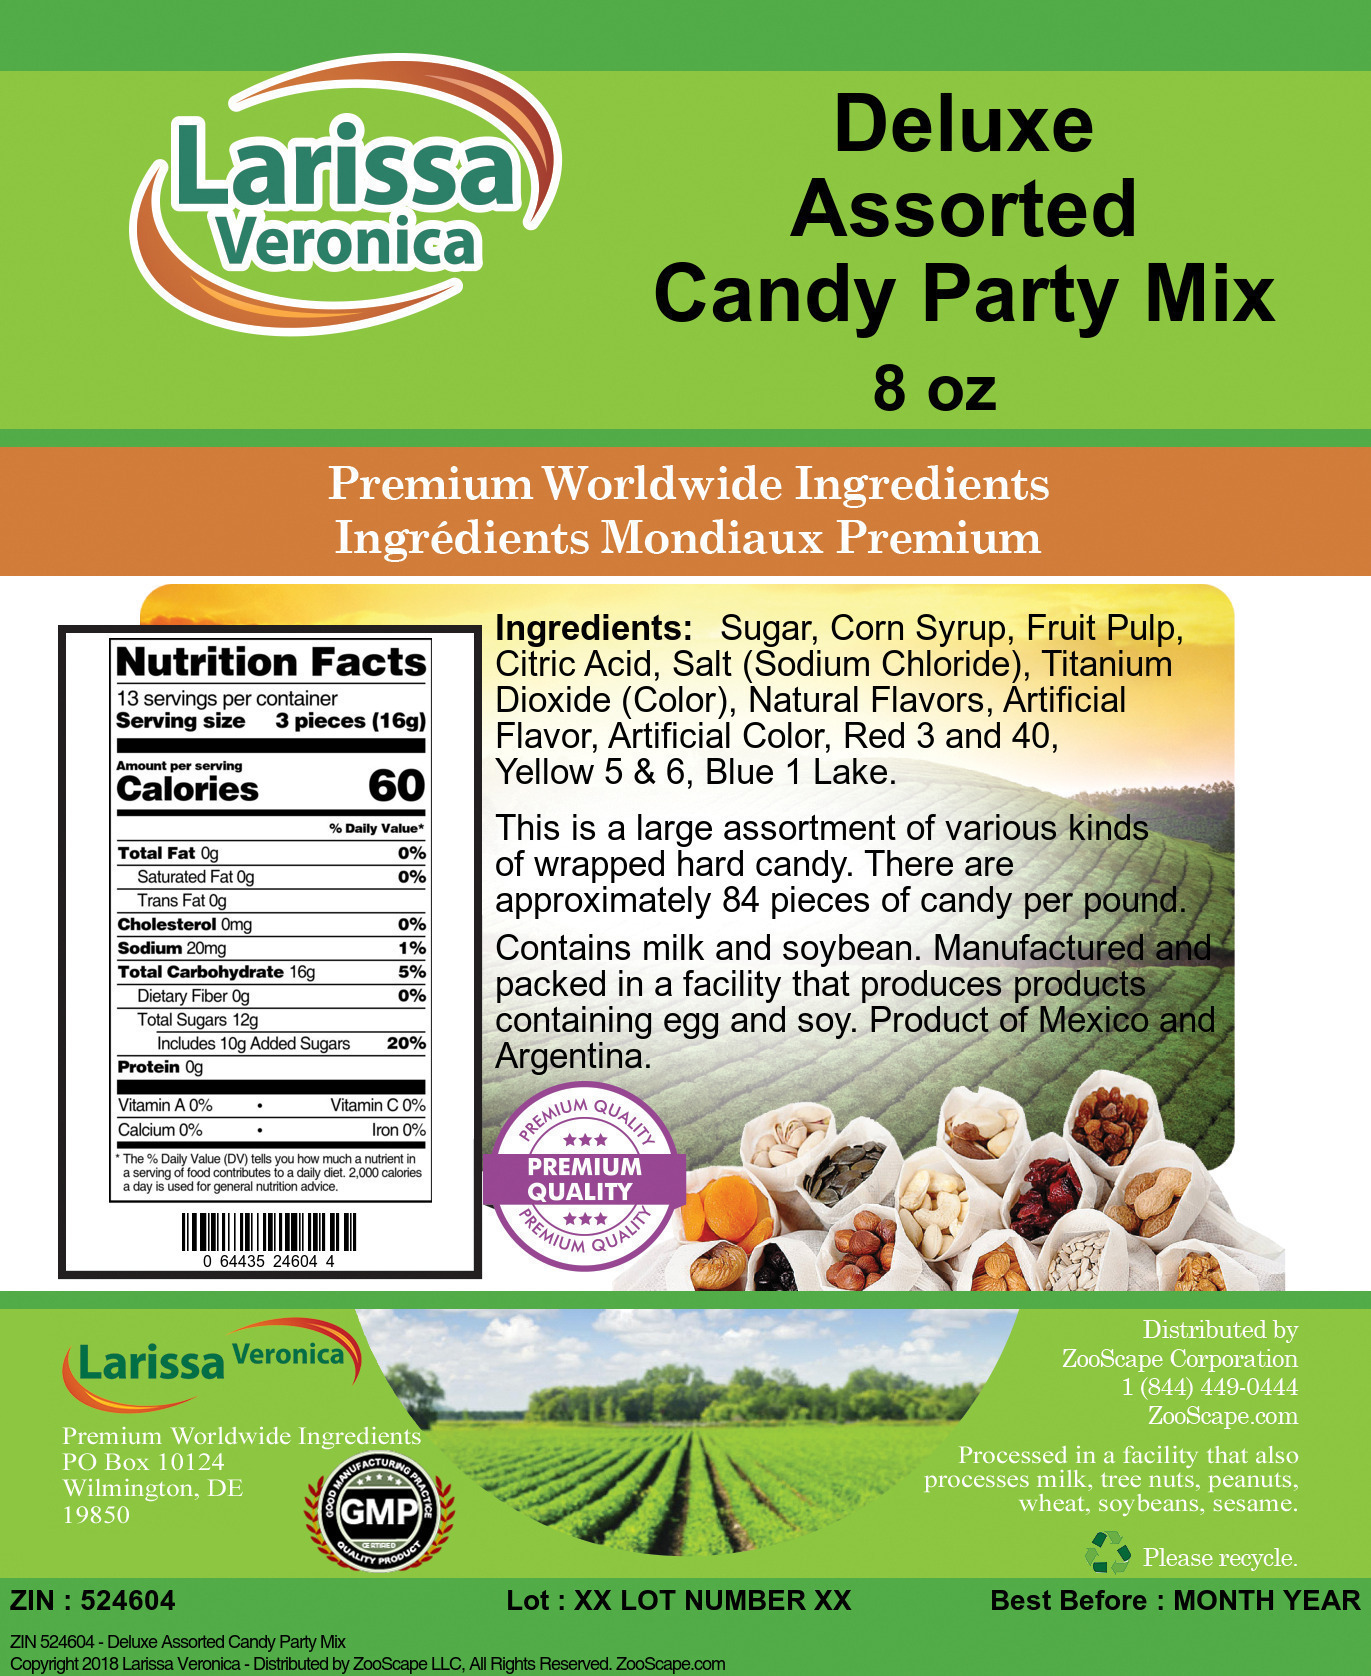 Deluxe Assorted Candy Party Mix - Label